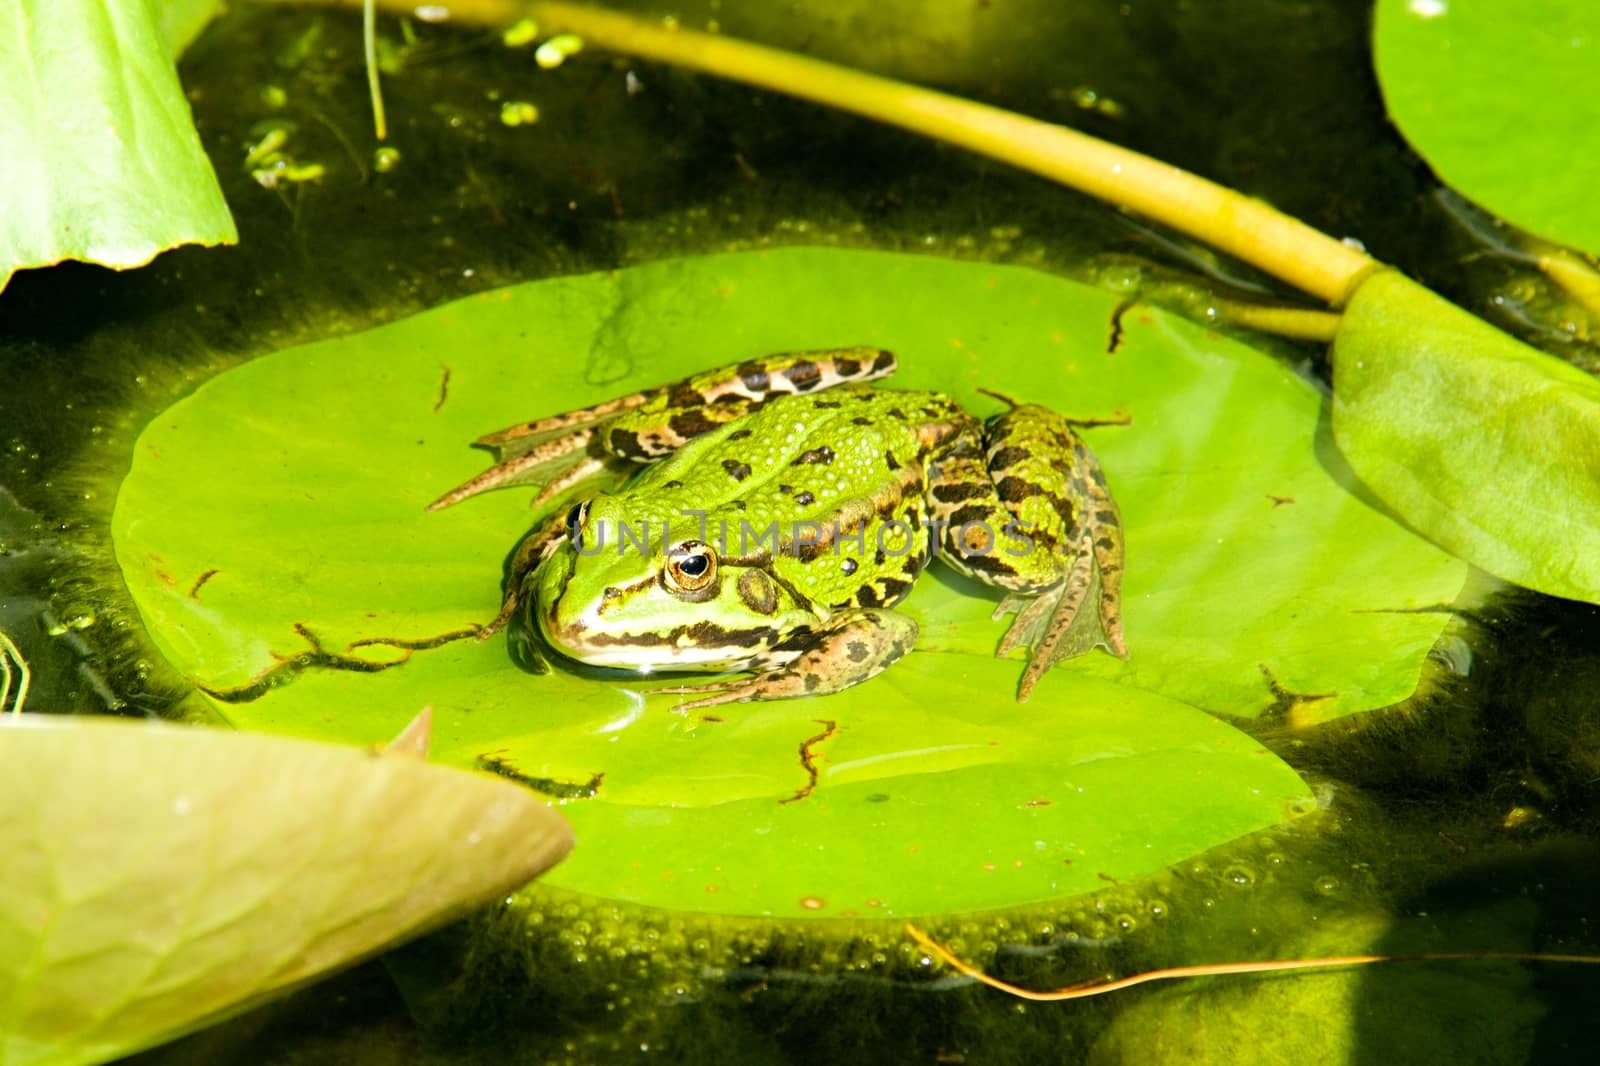 Photo shows closeup details of green frog on the lake's leaf.